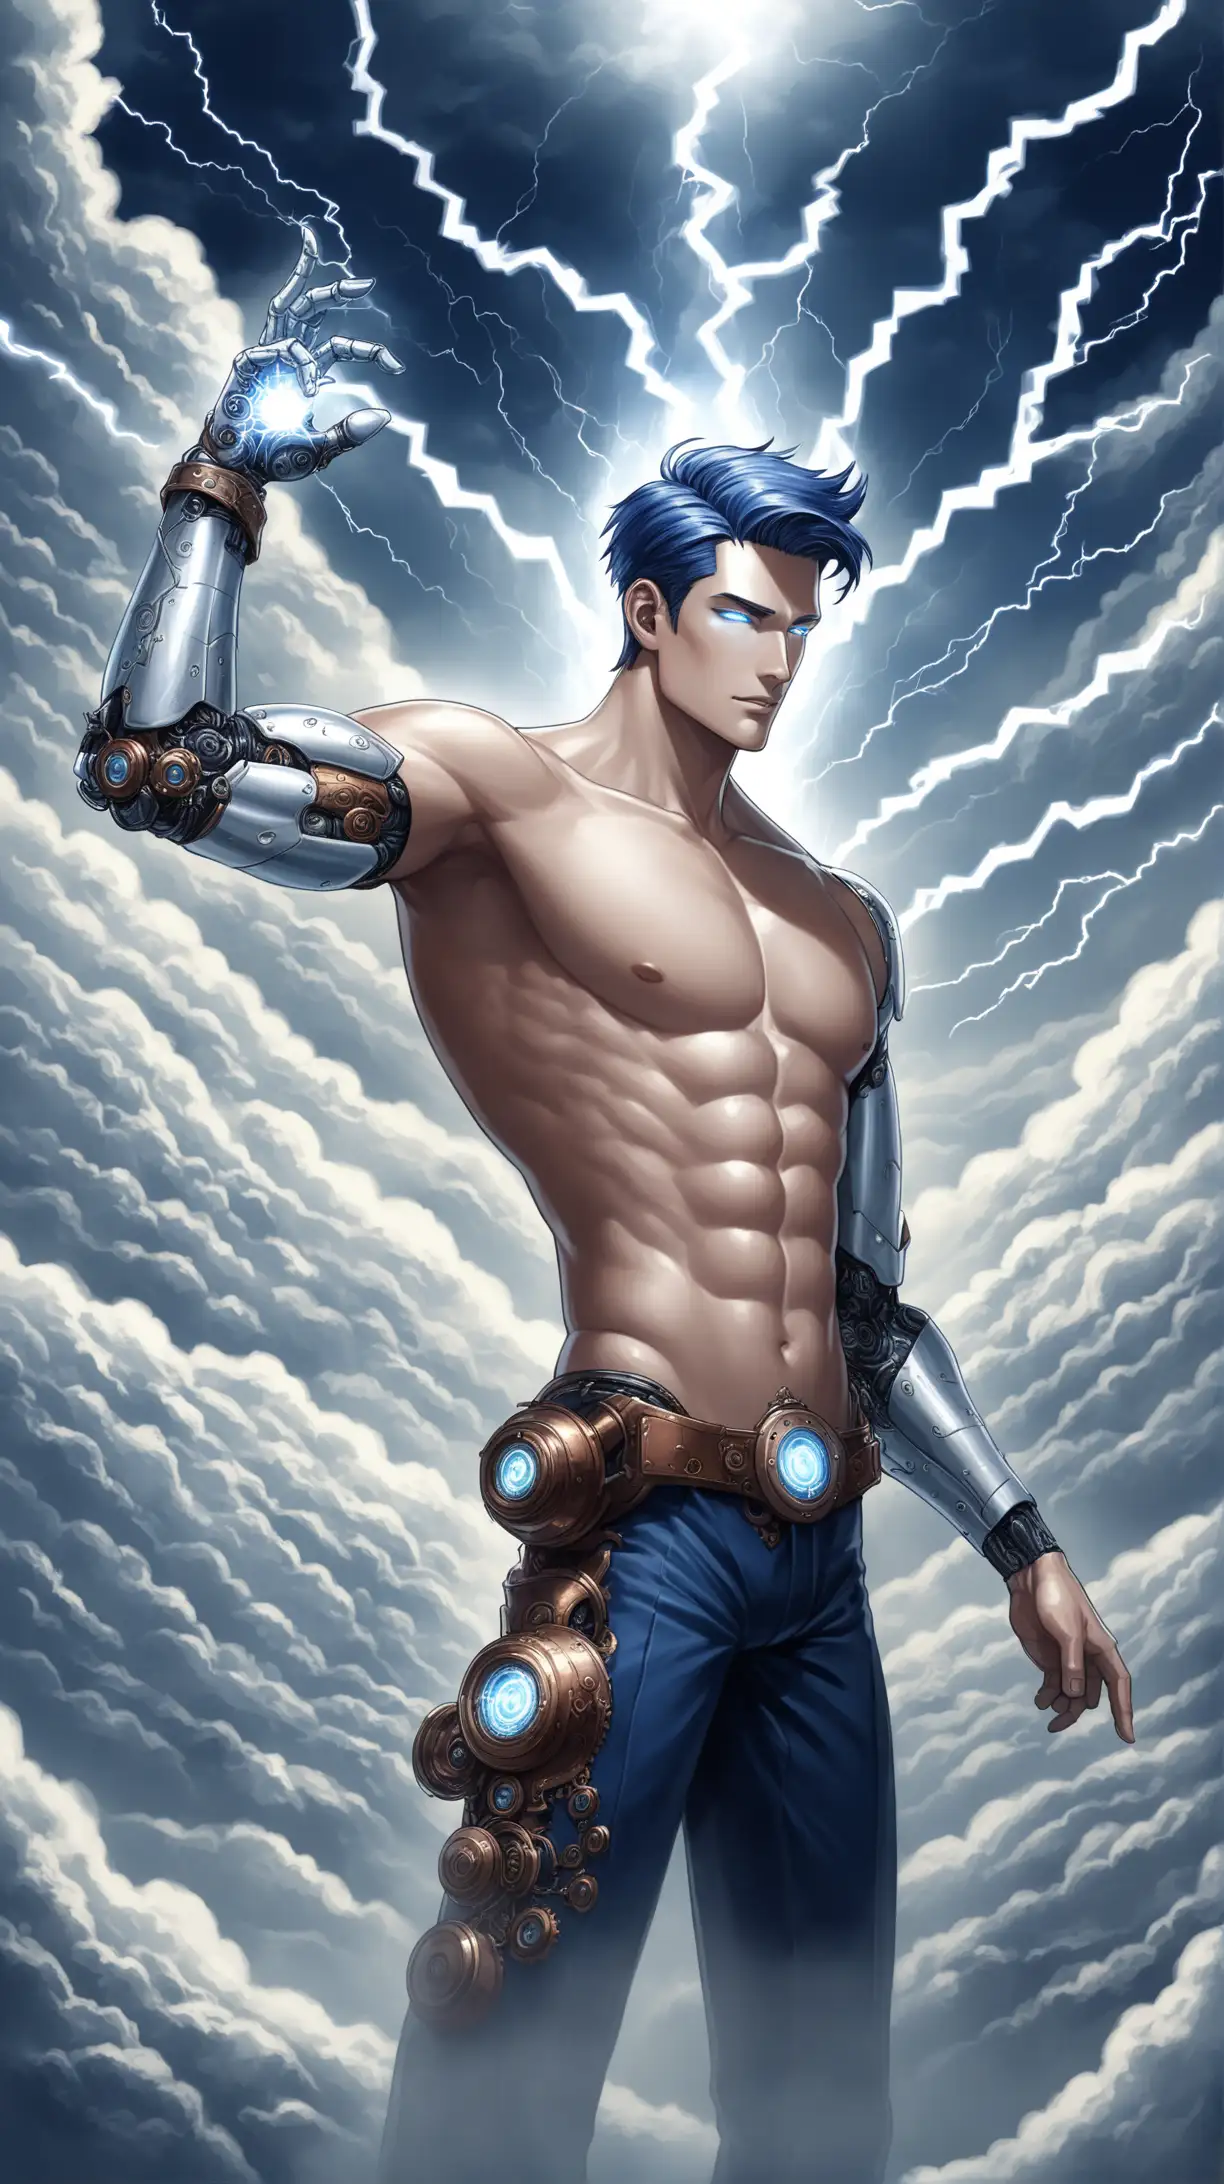 Futuristic Steampunk Android Harnessing Lightning atop Mountain